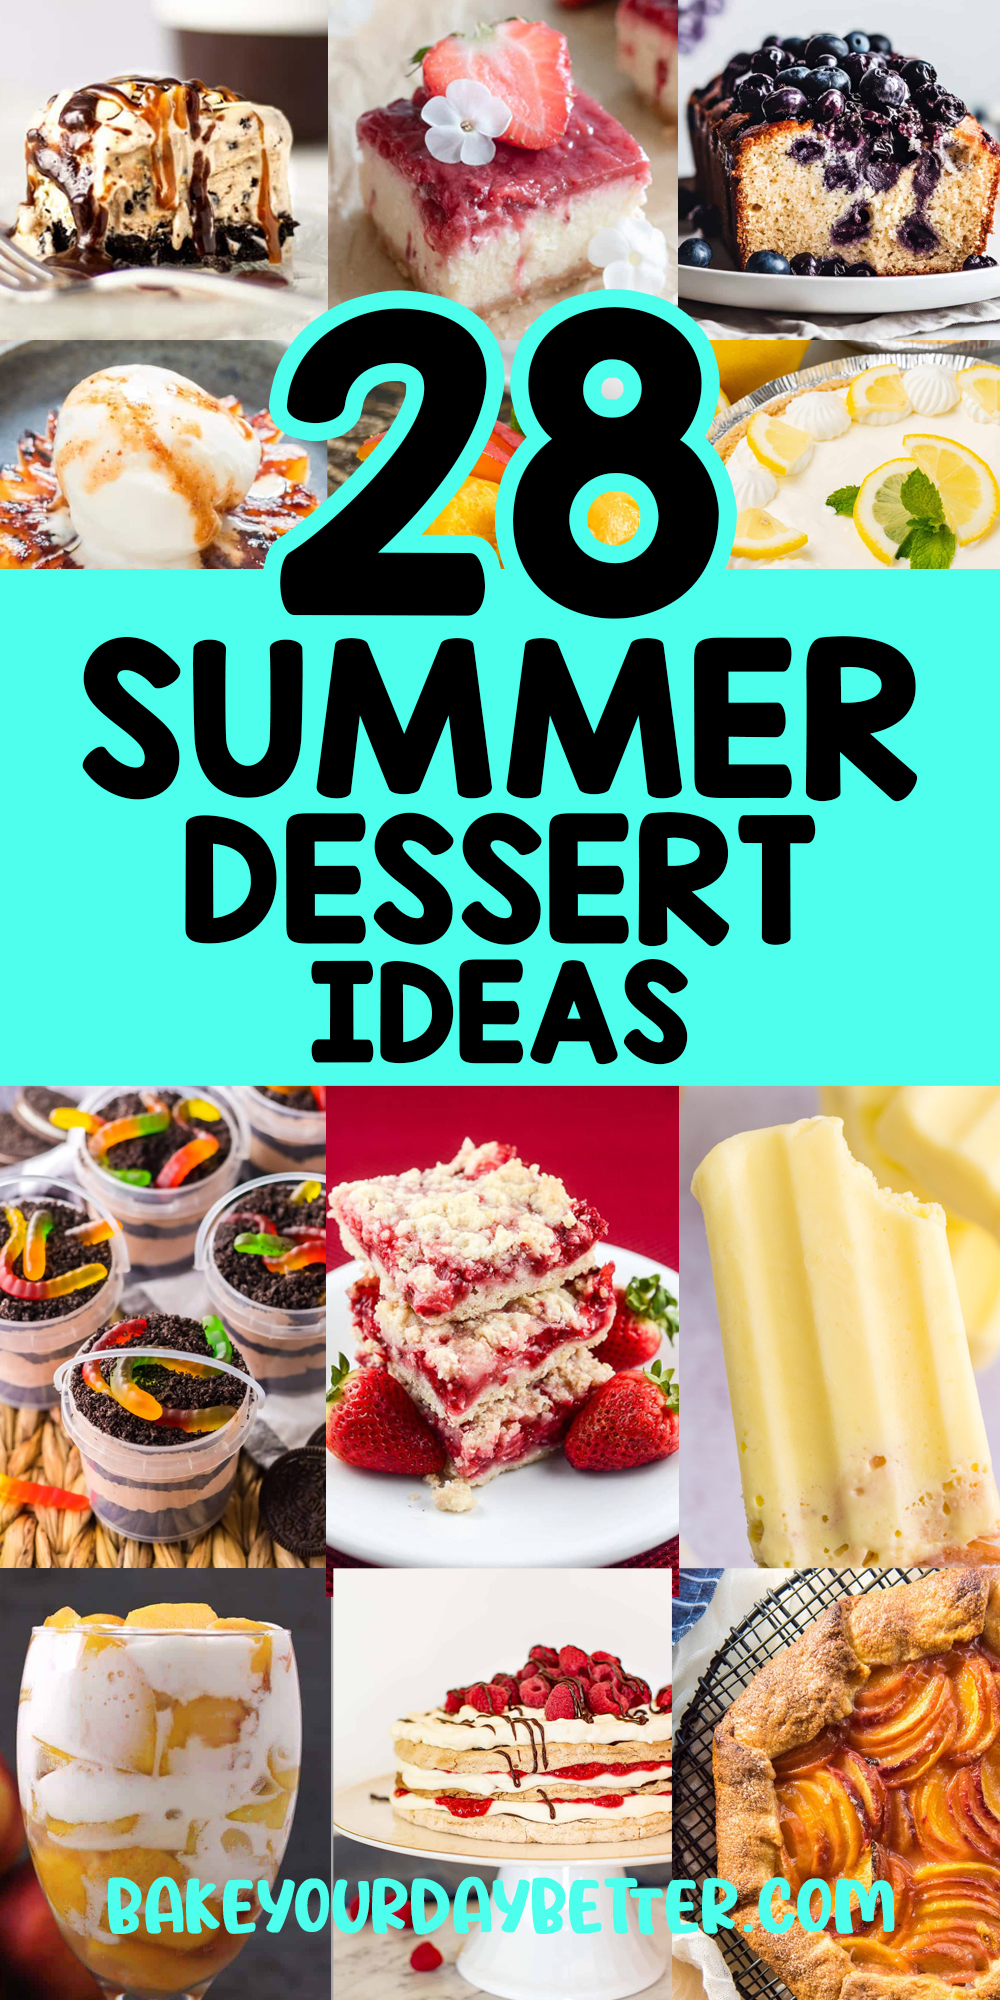 pictures of summer desserts with text overlay that says: 28 summer dessert ideas